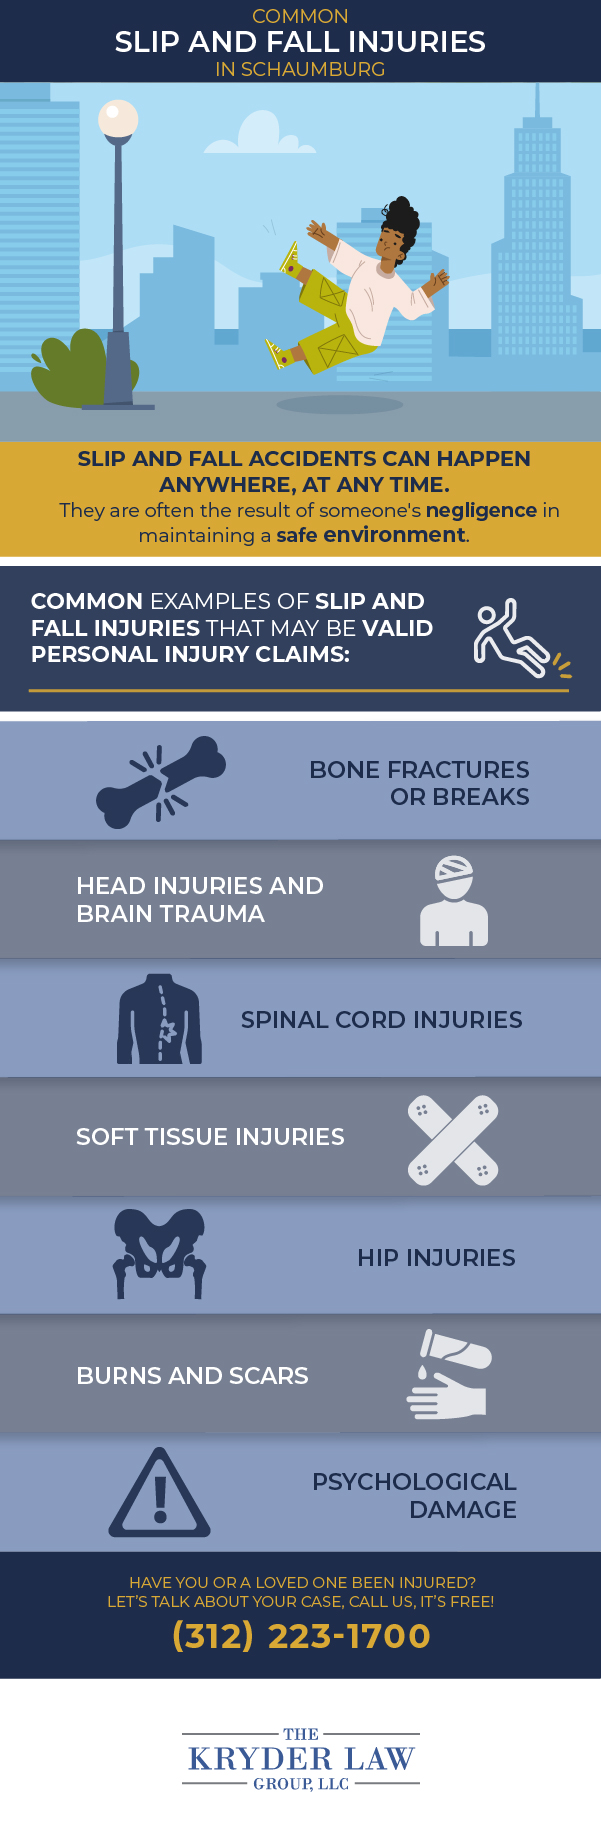 Common Slip and Fall Injuries in Schaumburg